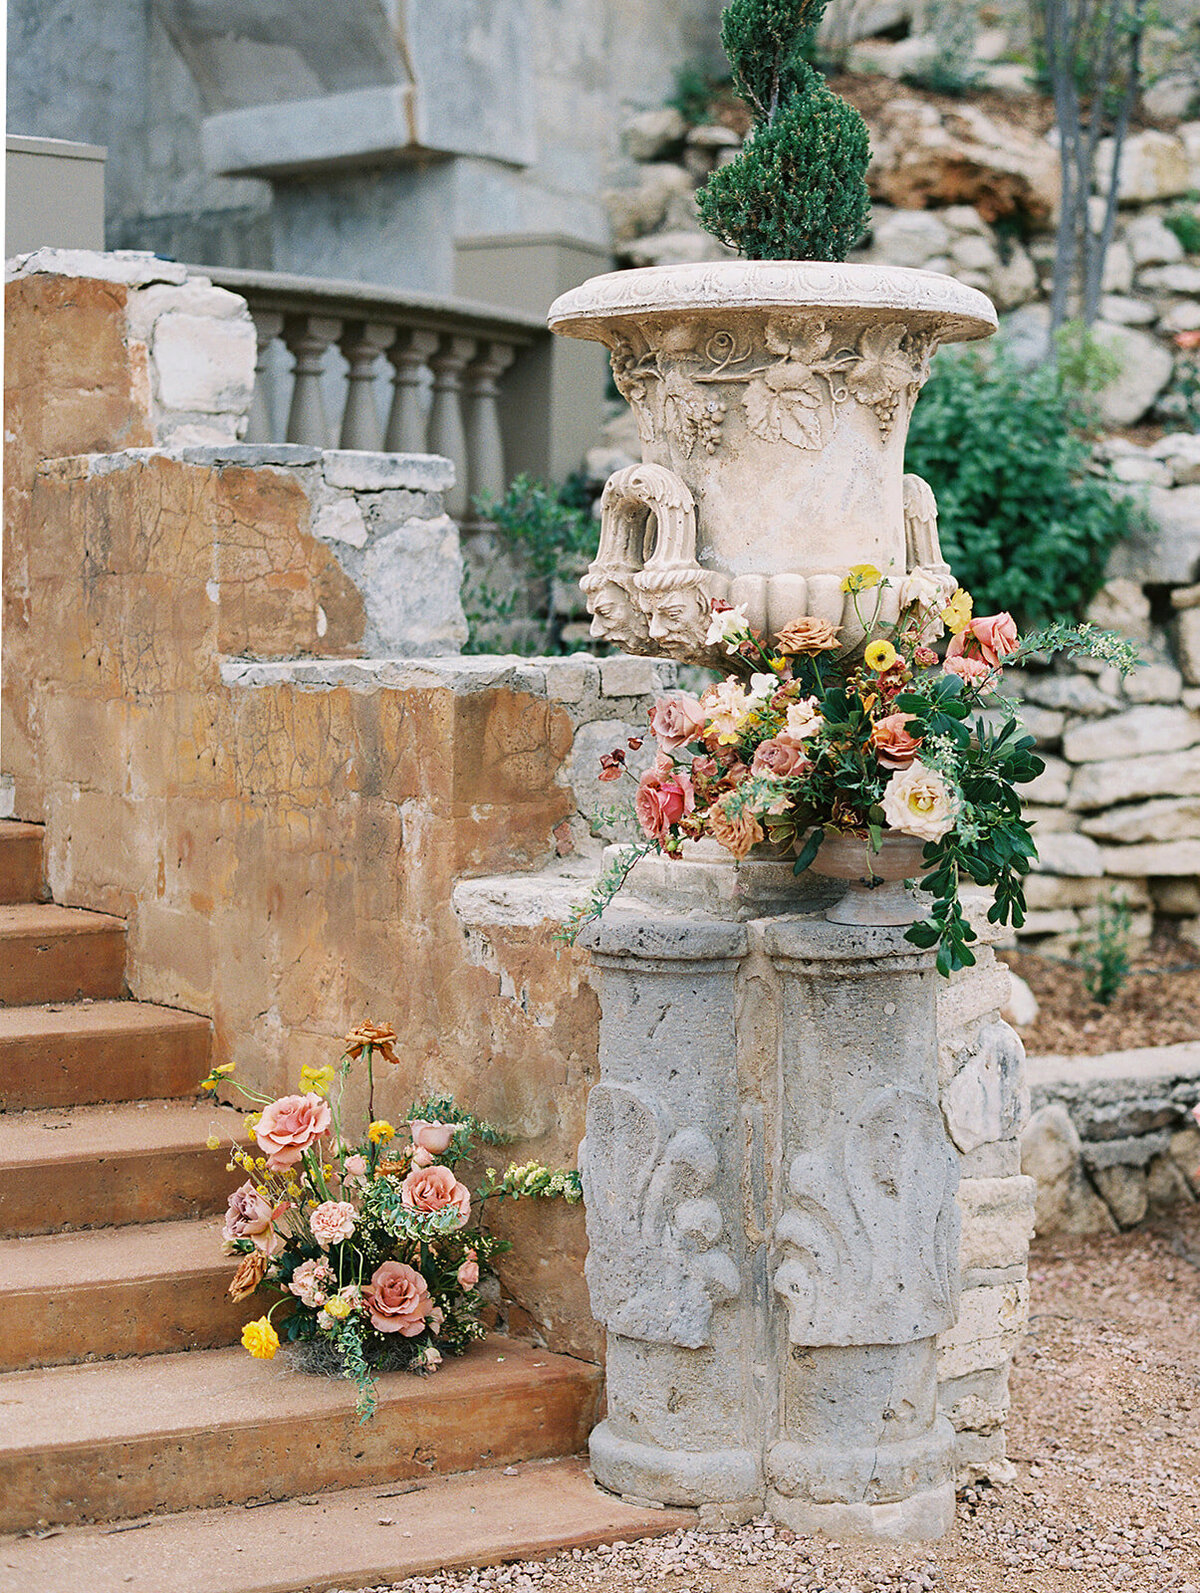 Flowers adorn the stone steps that lead down to the reception area at Villa Antonia